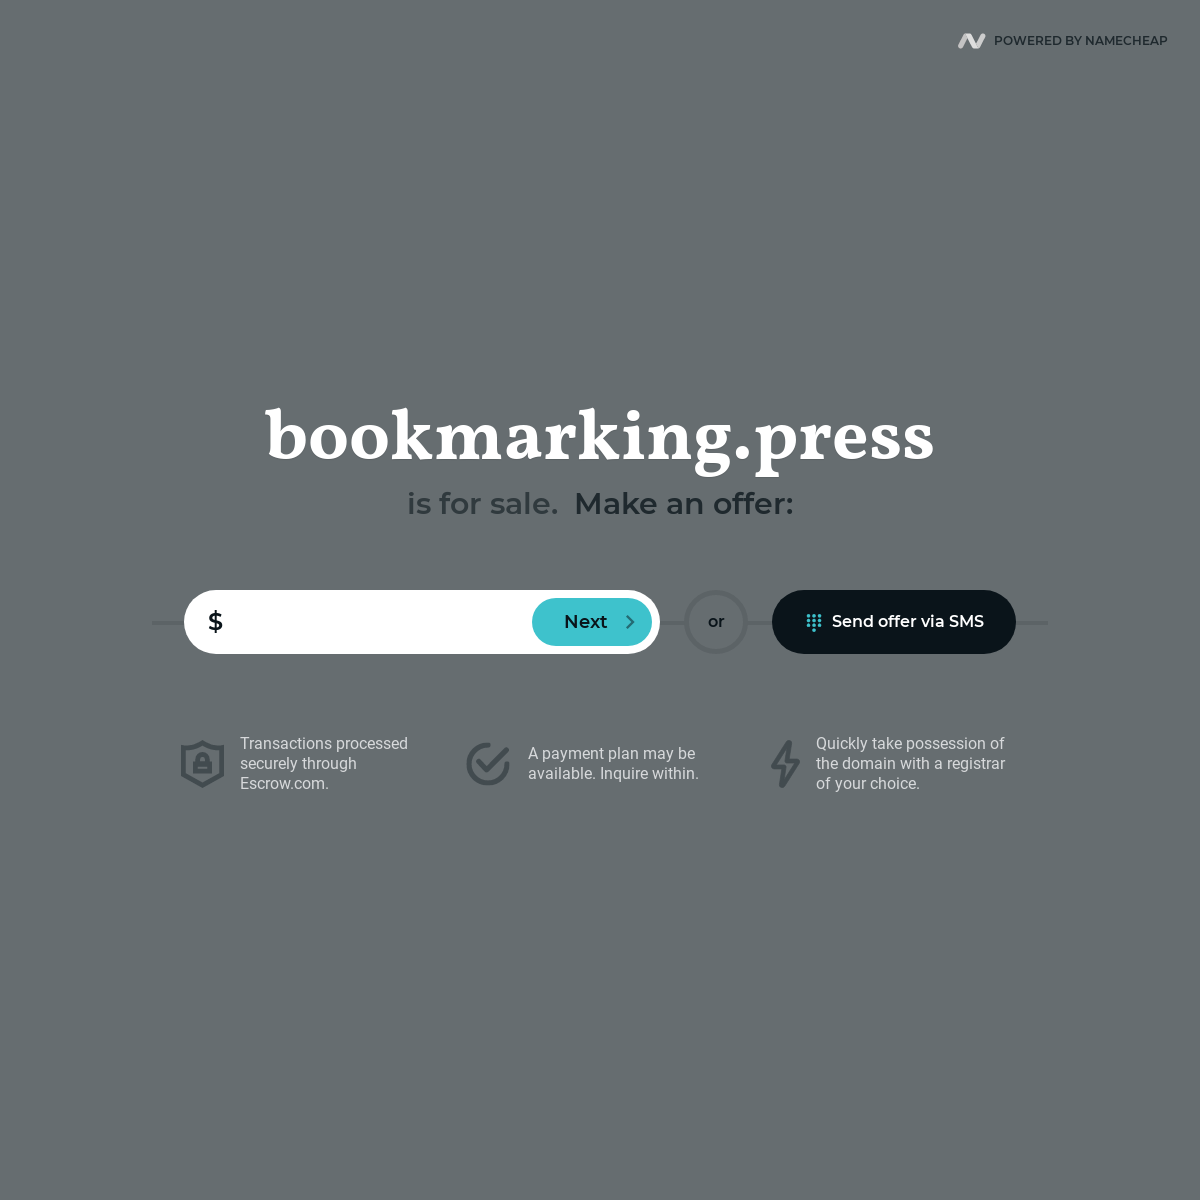 A complete backup of bookmarking.press